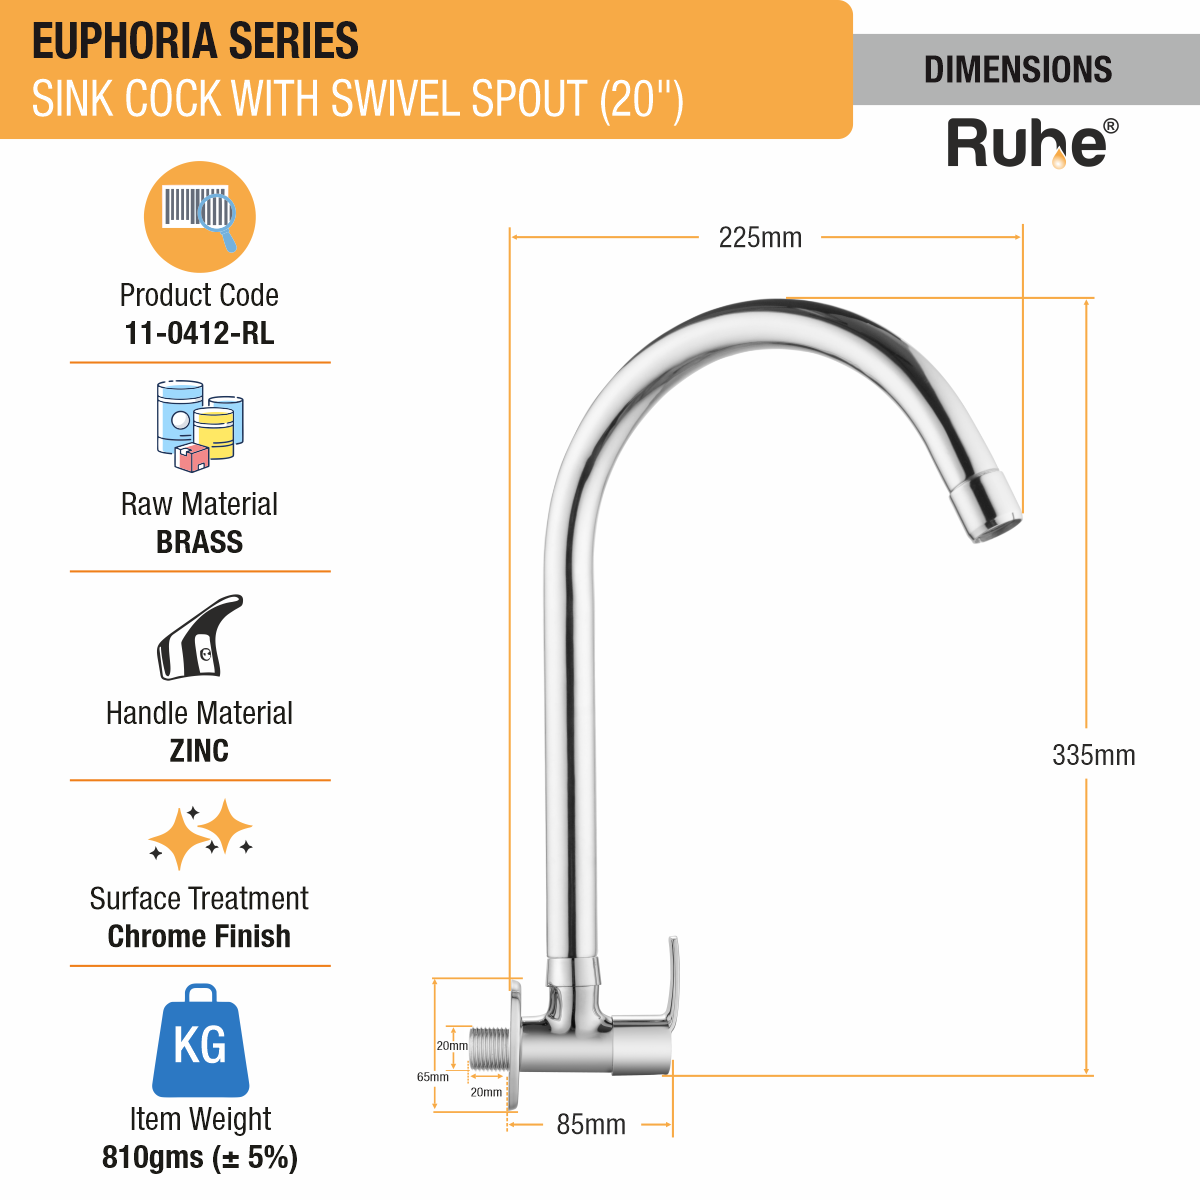 Euphoria Sink Tap with Large (20 inches) Round Swivel Spout Faucet dimensions and size